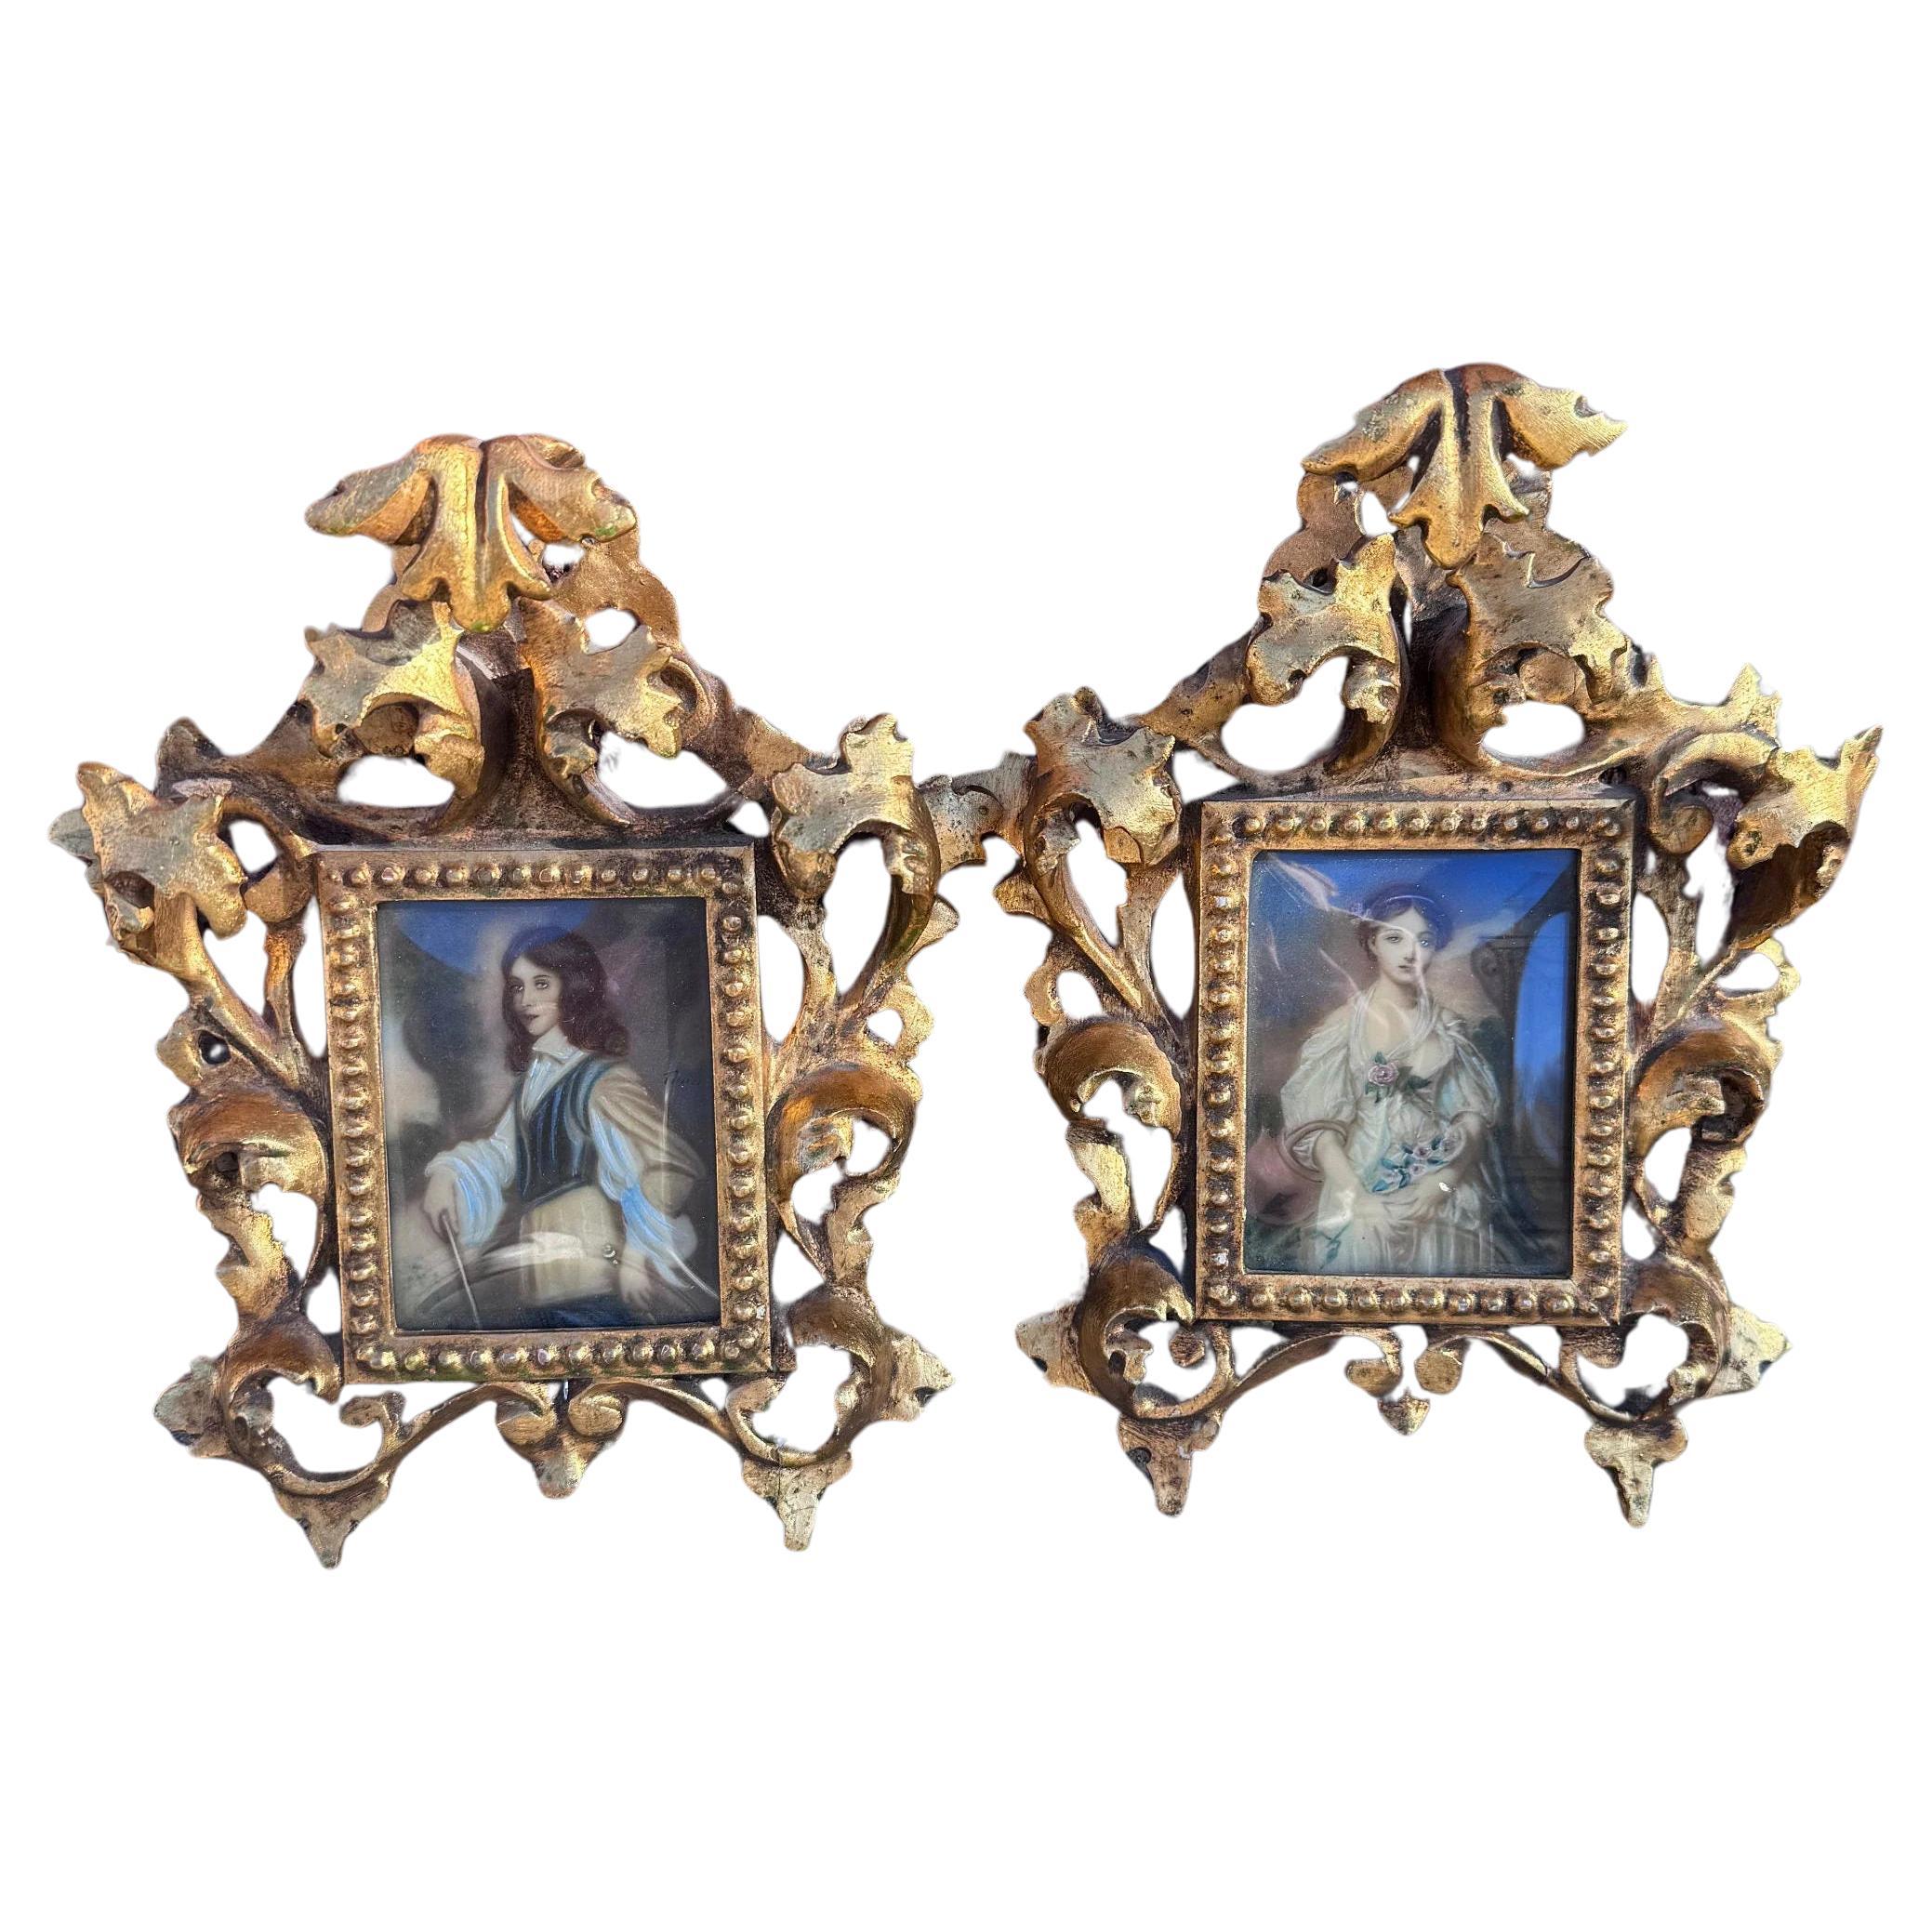 Antique Victorian Portraits on Hand-Painted Porcelain Plaques in Carved Frames